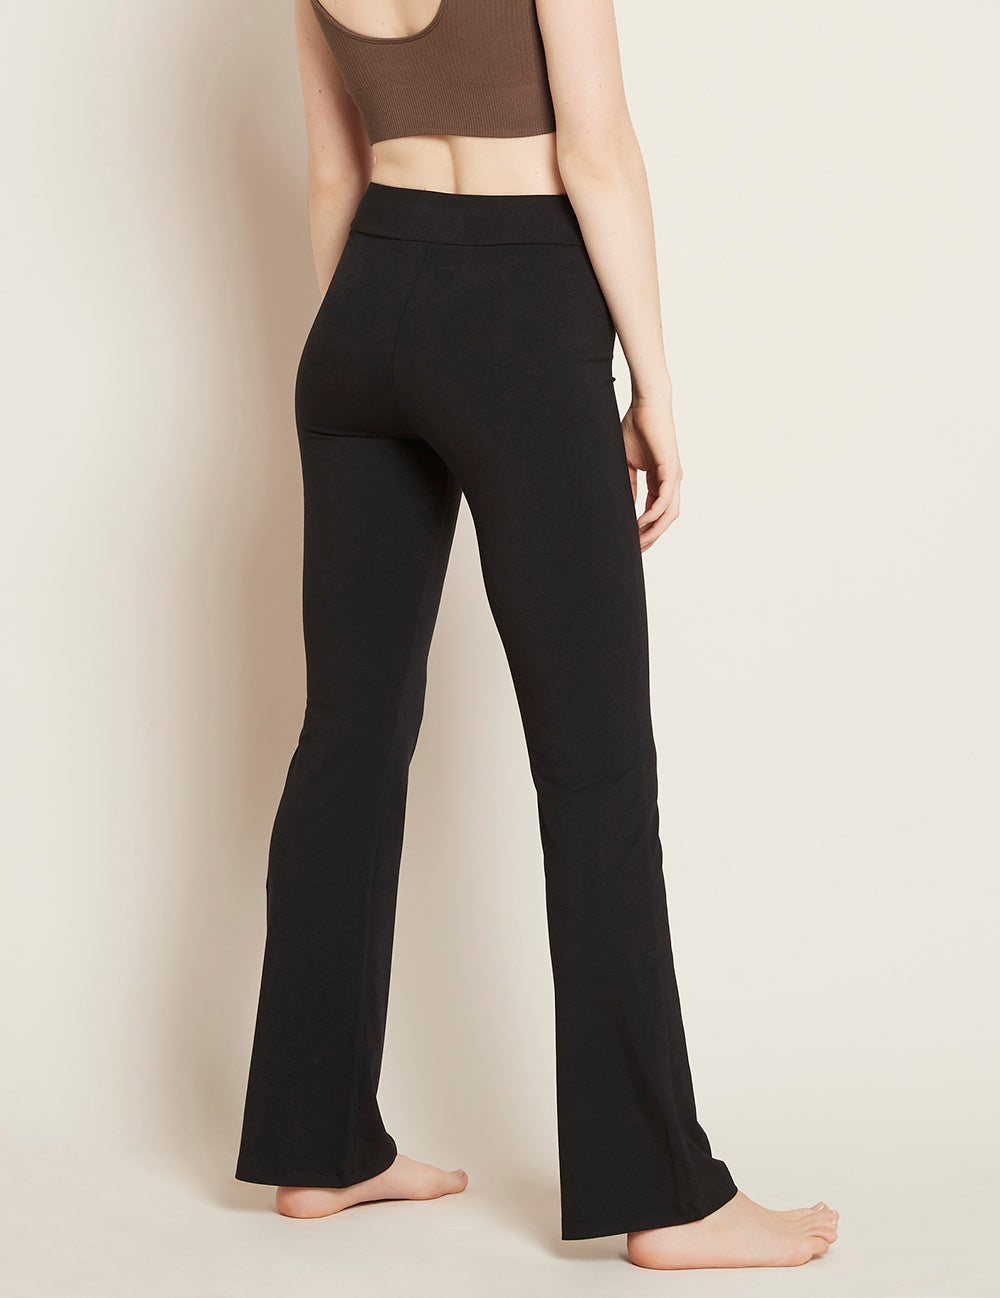 Blissclub Trousers And Pants : Buy Blissclub Women Navy Blue On The Go Slit Flare  Pants With Two Pocket and High Waisted Online|Nykaa Fashion